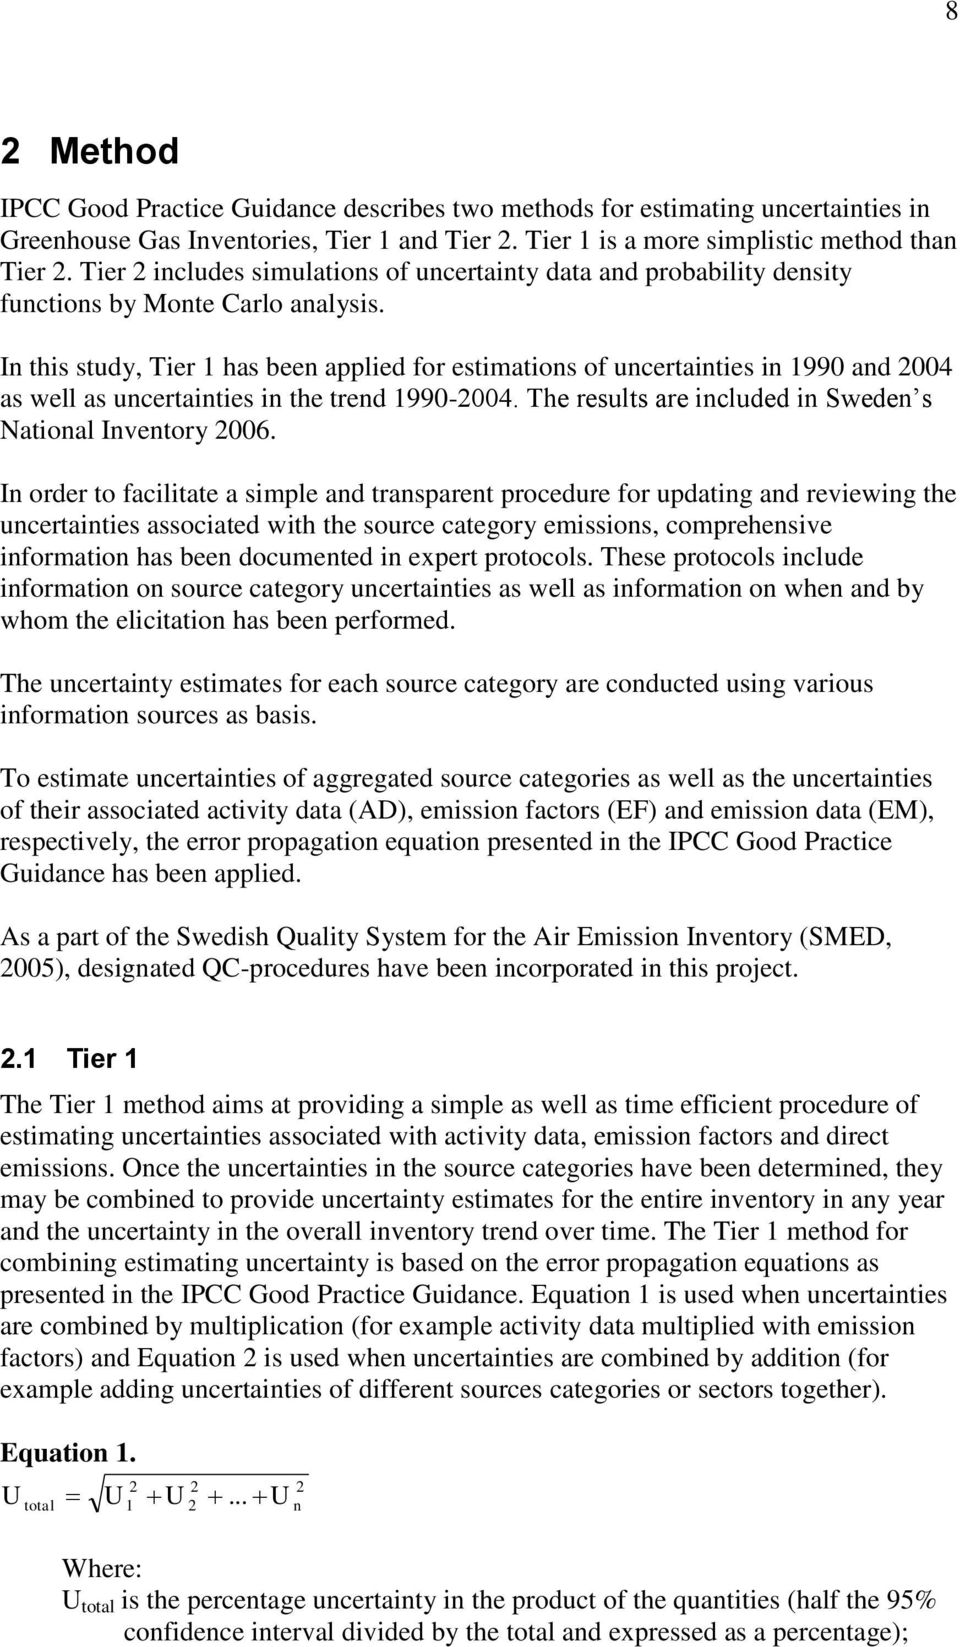 In this study, Tier 1 has been applied for estimations of uncertainties in 1990 and 004 as well as uncertainties in the trend 1990-004. The results are included in Sweden s National Inventory 006.